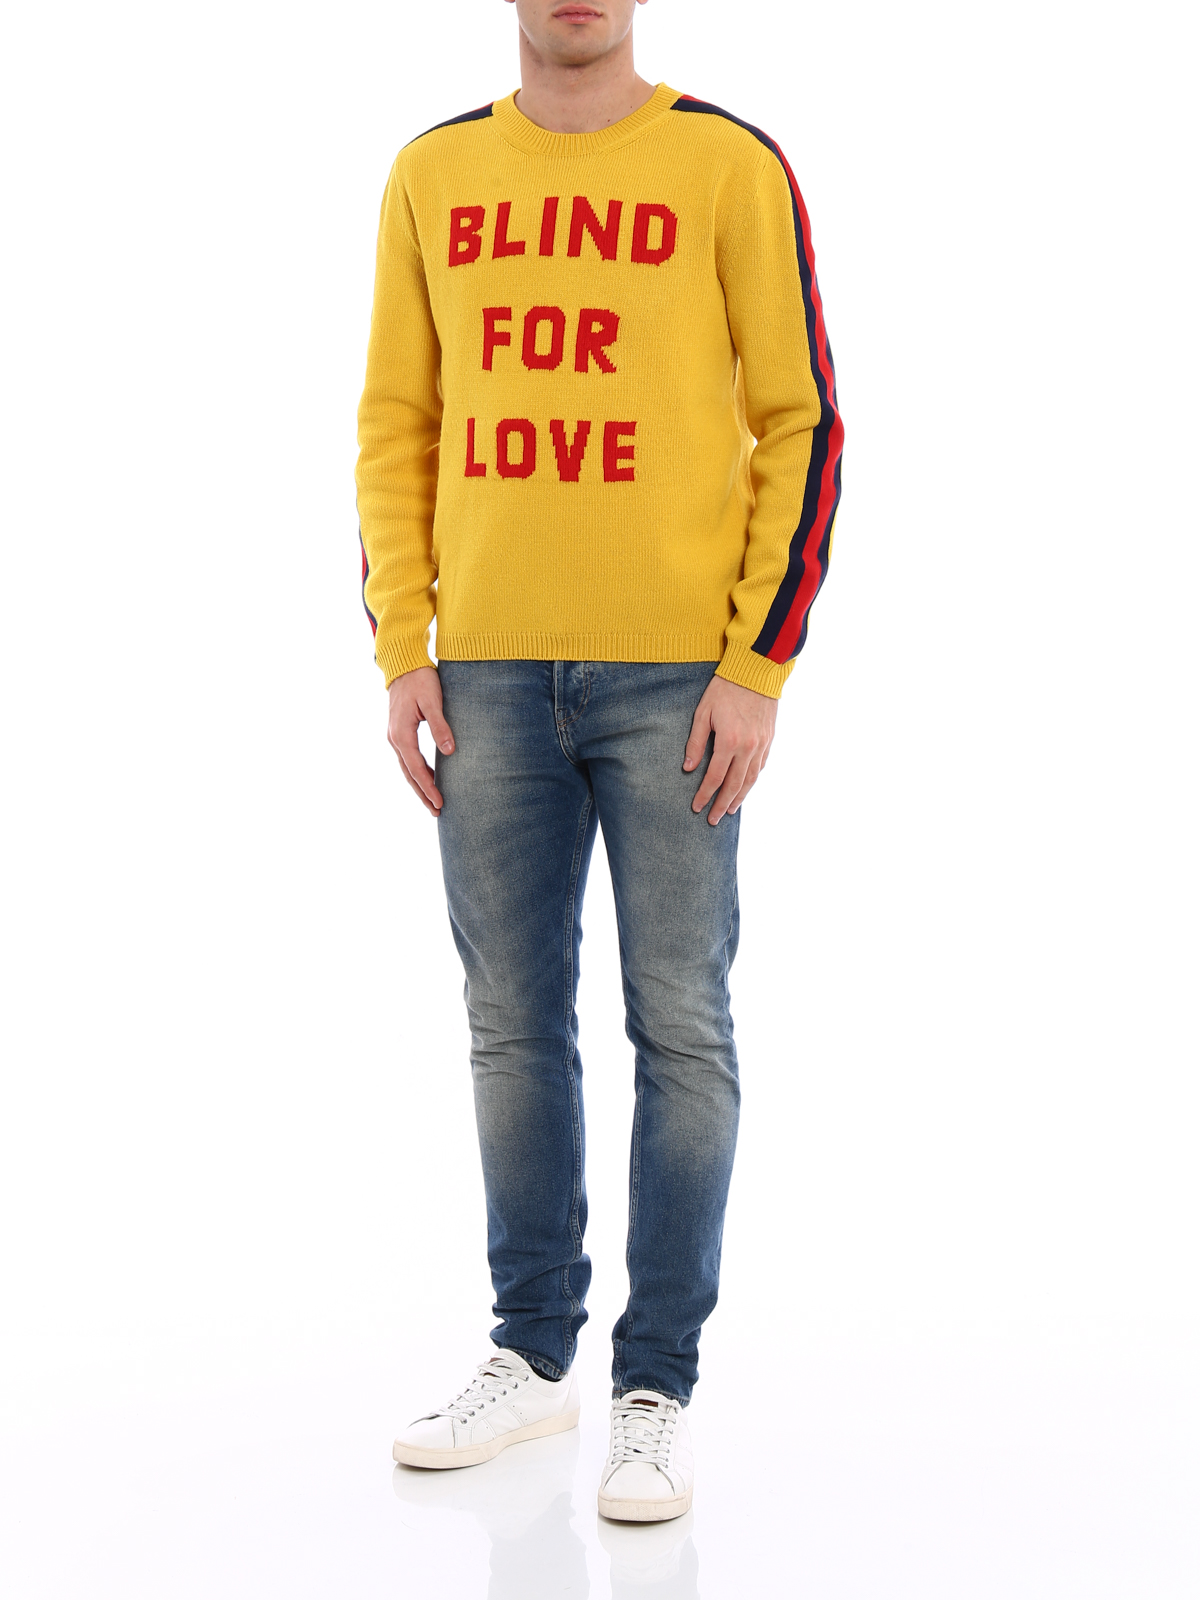 blind for love gucci sweater